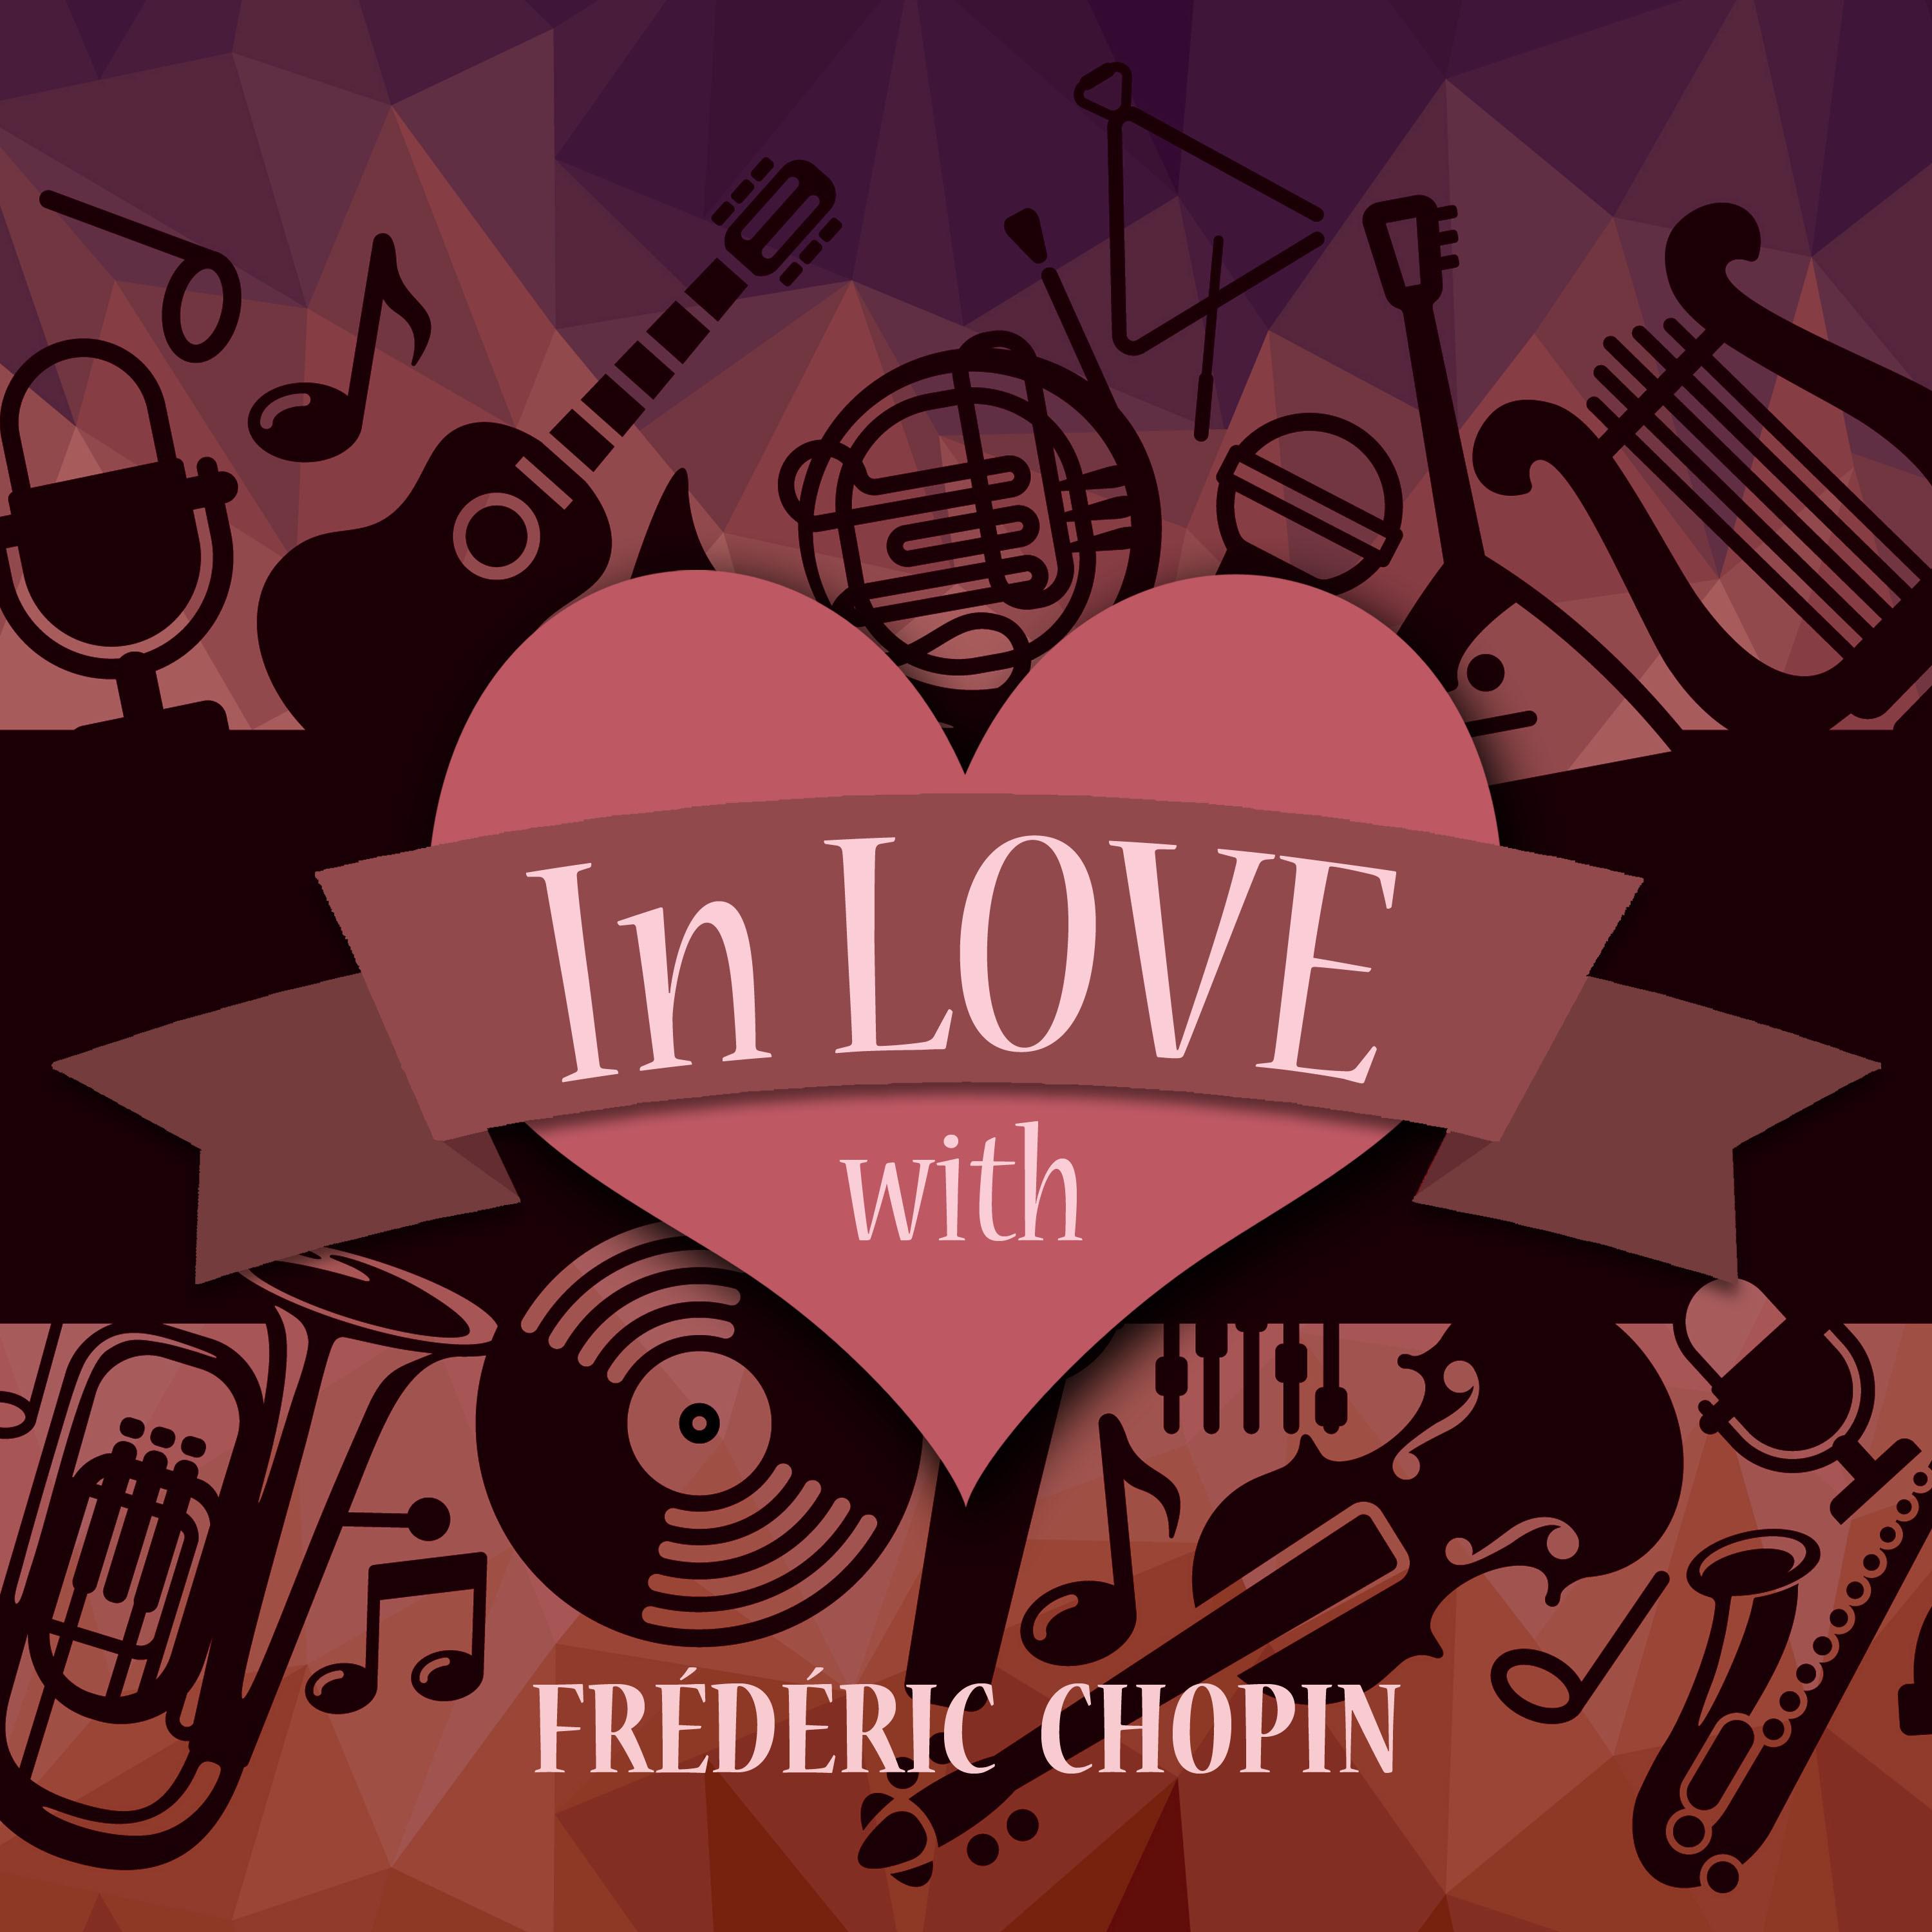 In Love with Frédéric Chopin